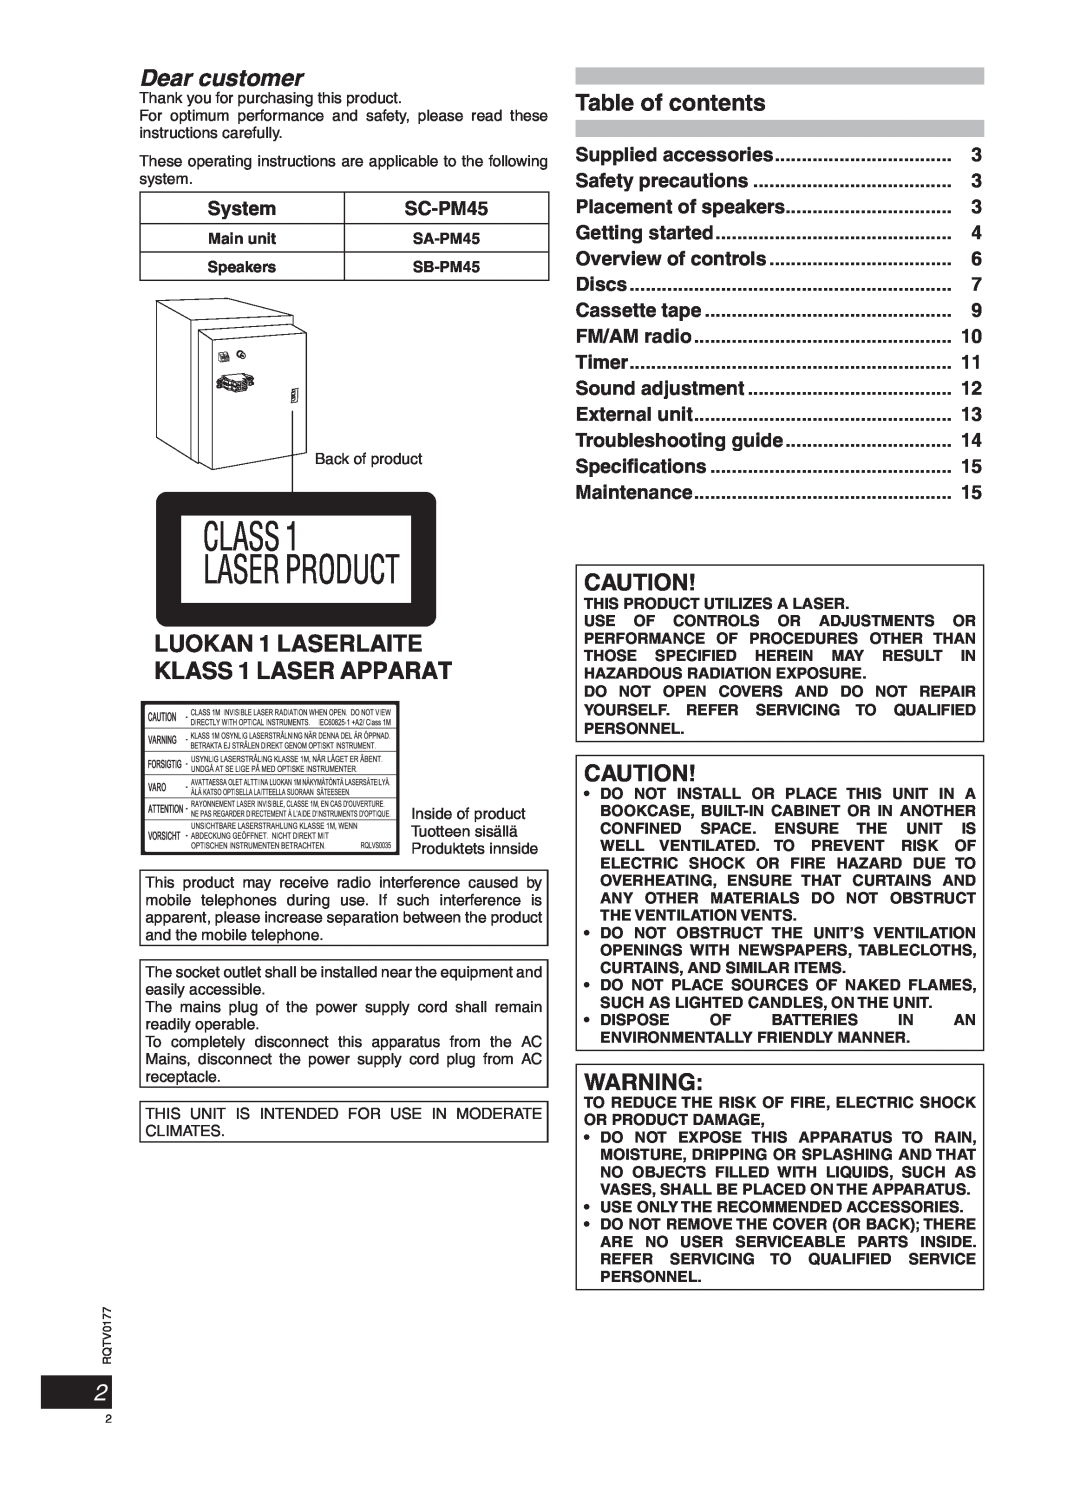 Panasonic SC-PM45 manual Dear customer, Table of contents, System 